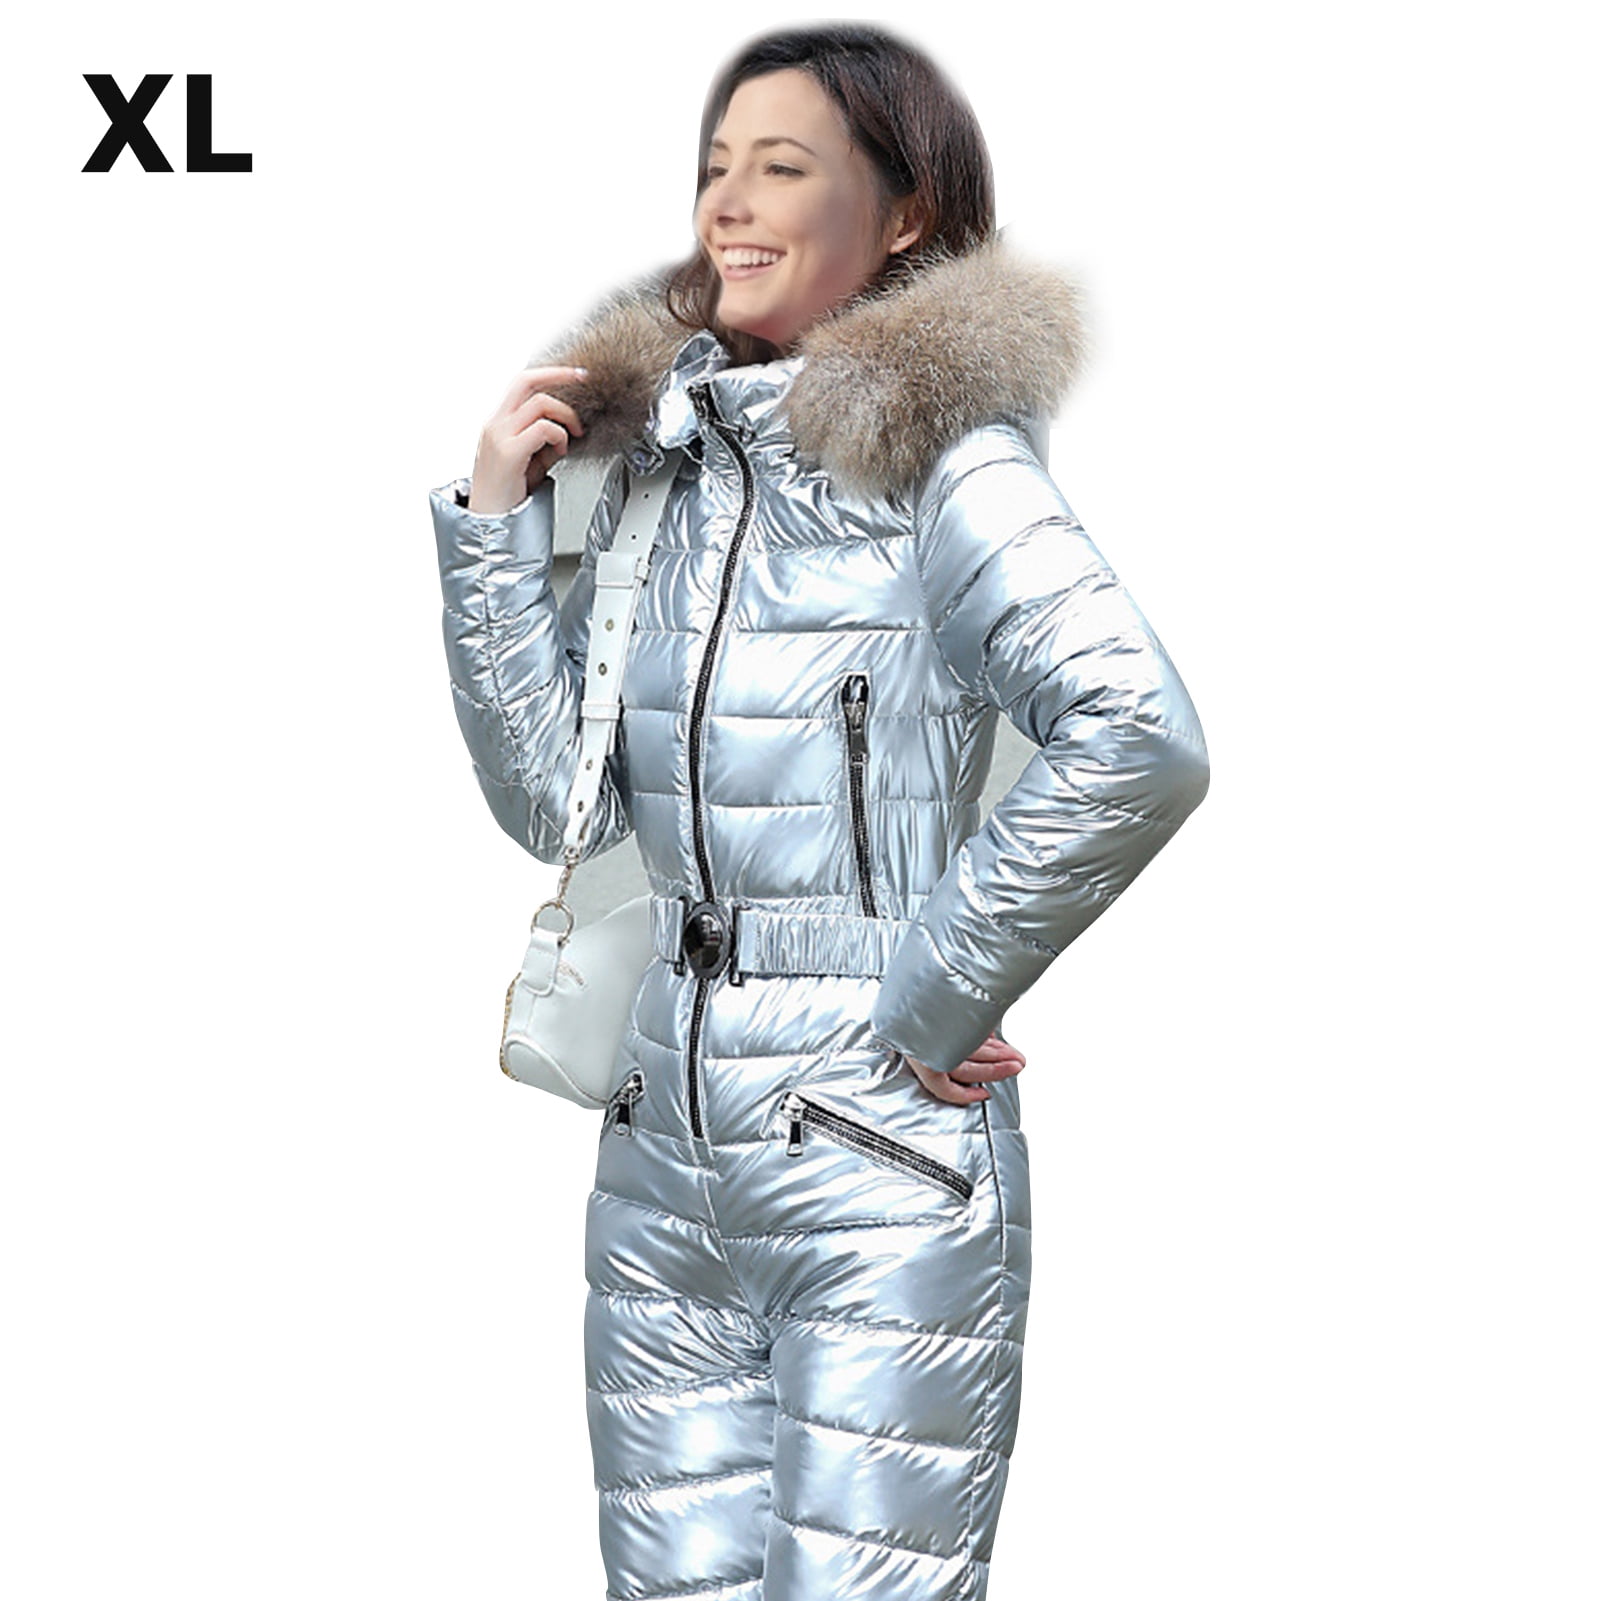 Winter Snowsuits Coat Skiing Romper Outfits with Hooded One Piece Jumpsuit Windproof Thick Warm Snow suit Ski Suits 